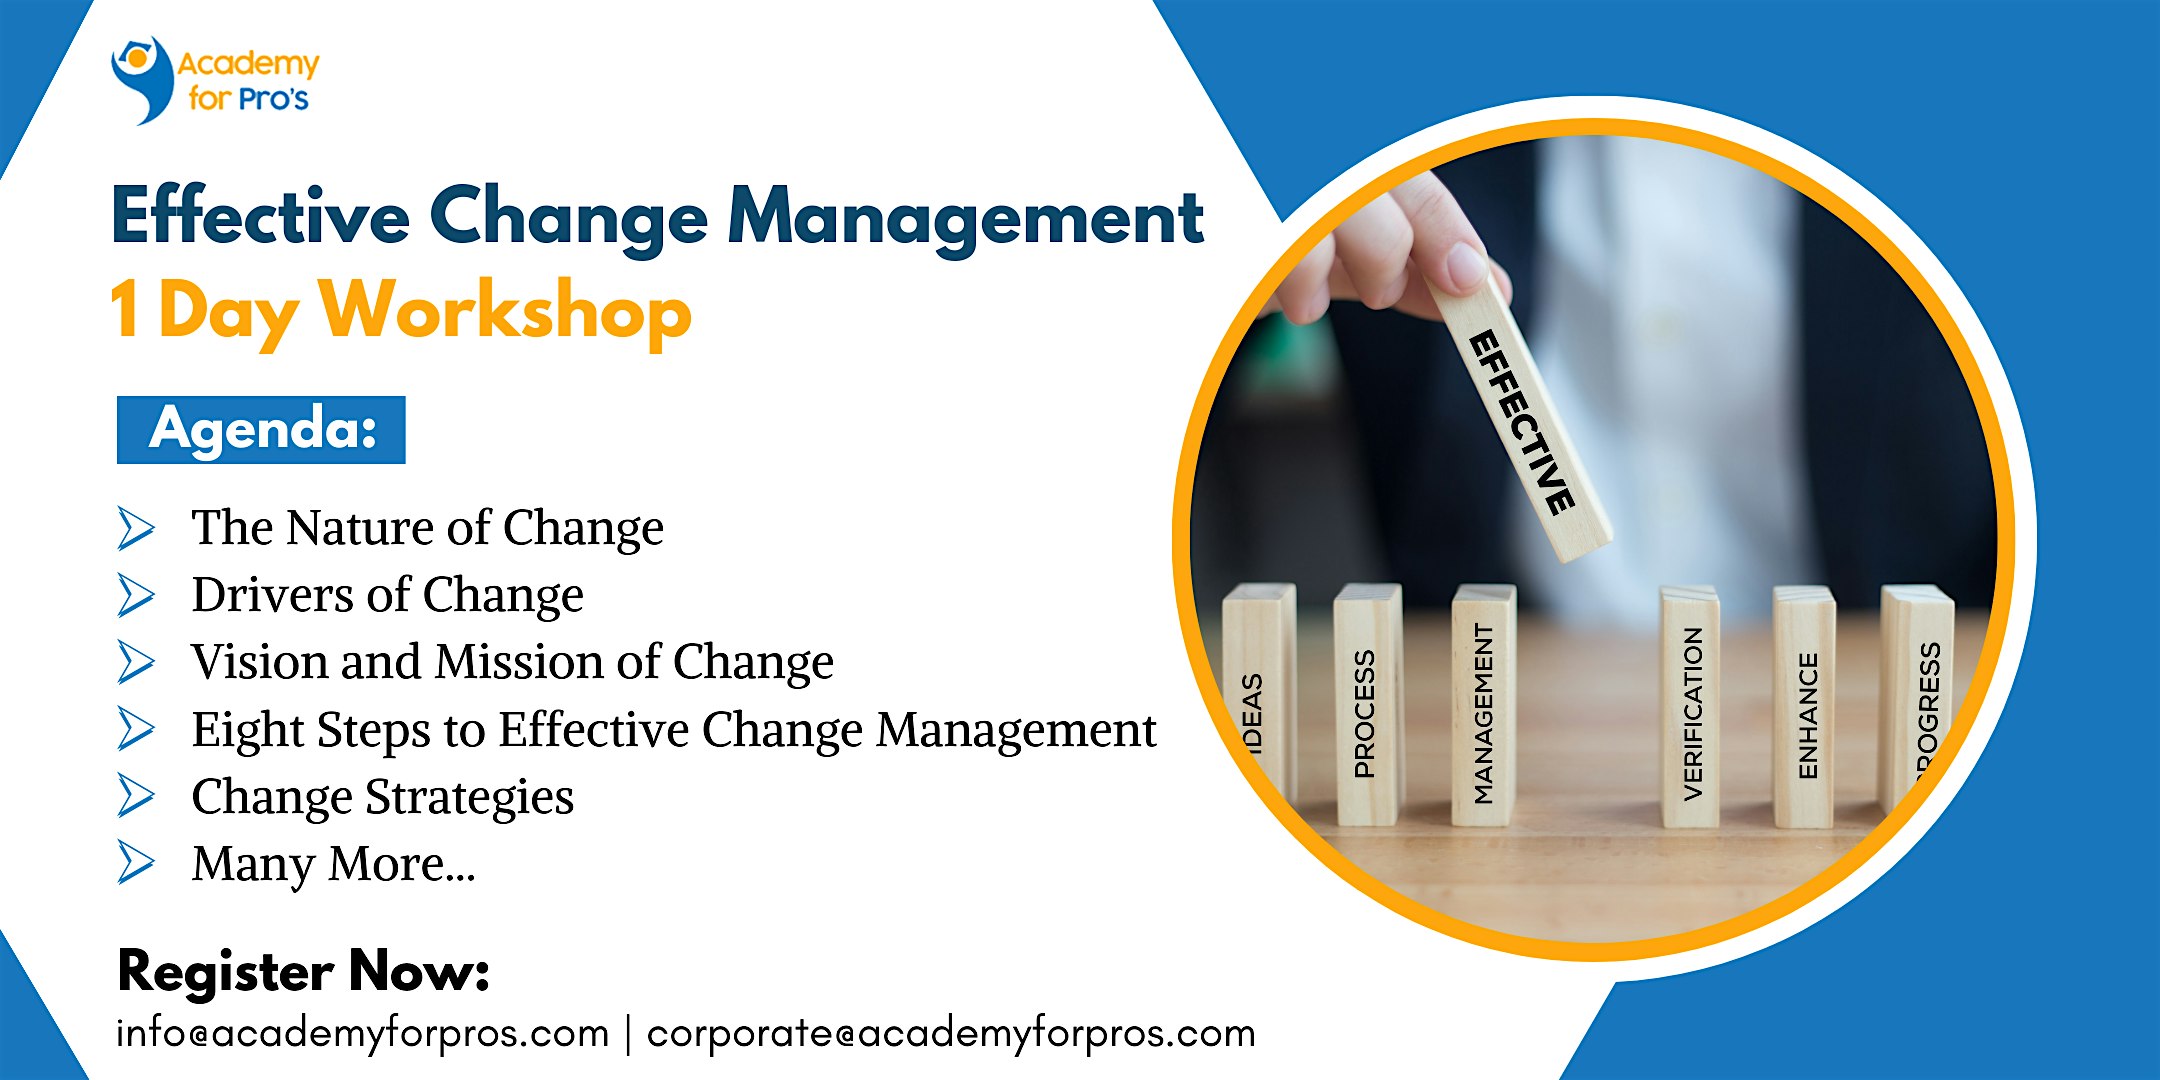 Effective Change Management 1 Day Workshop in Albany, NY